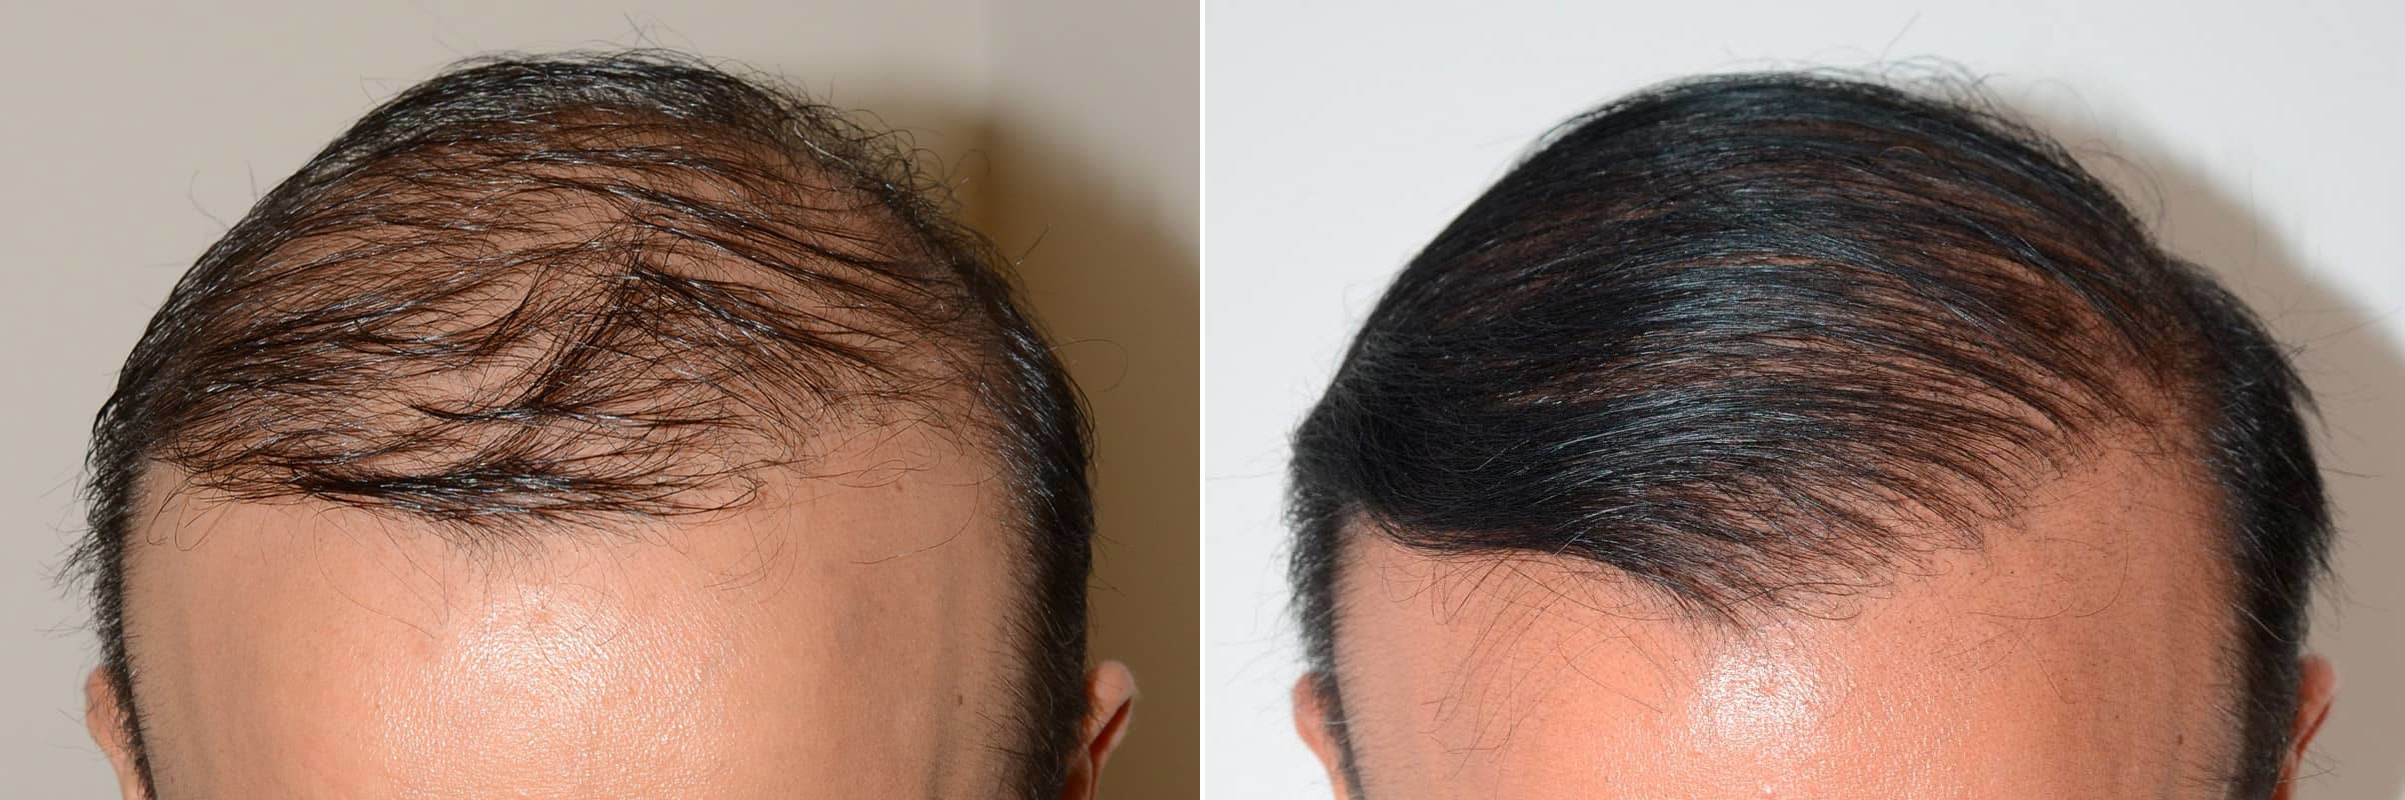 Body Hair Transplant Before and After Photos - Foundation For Hair  Restoration